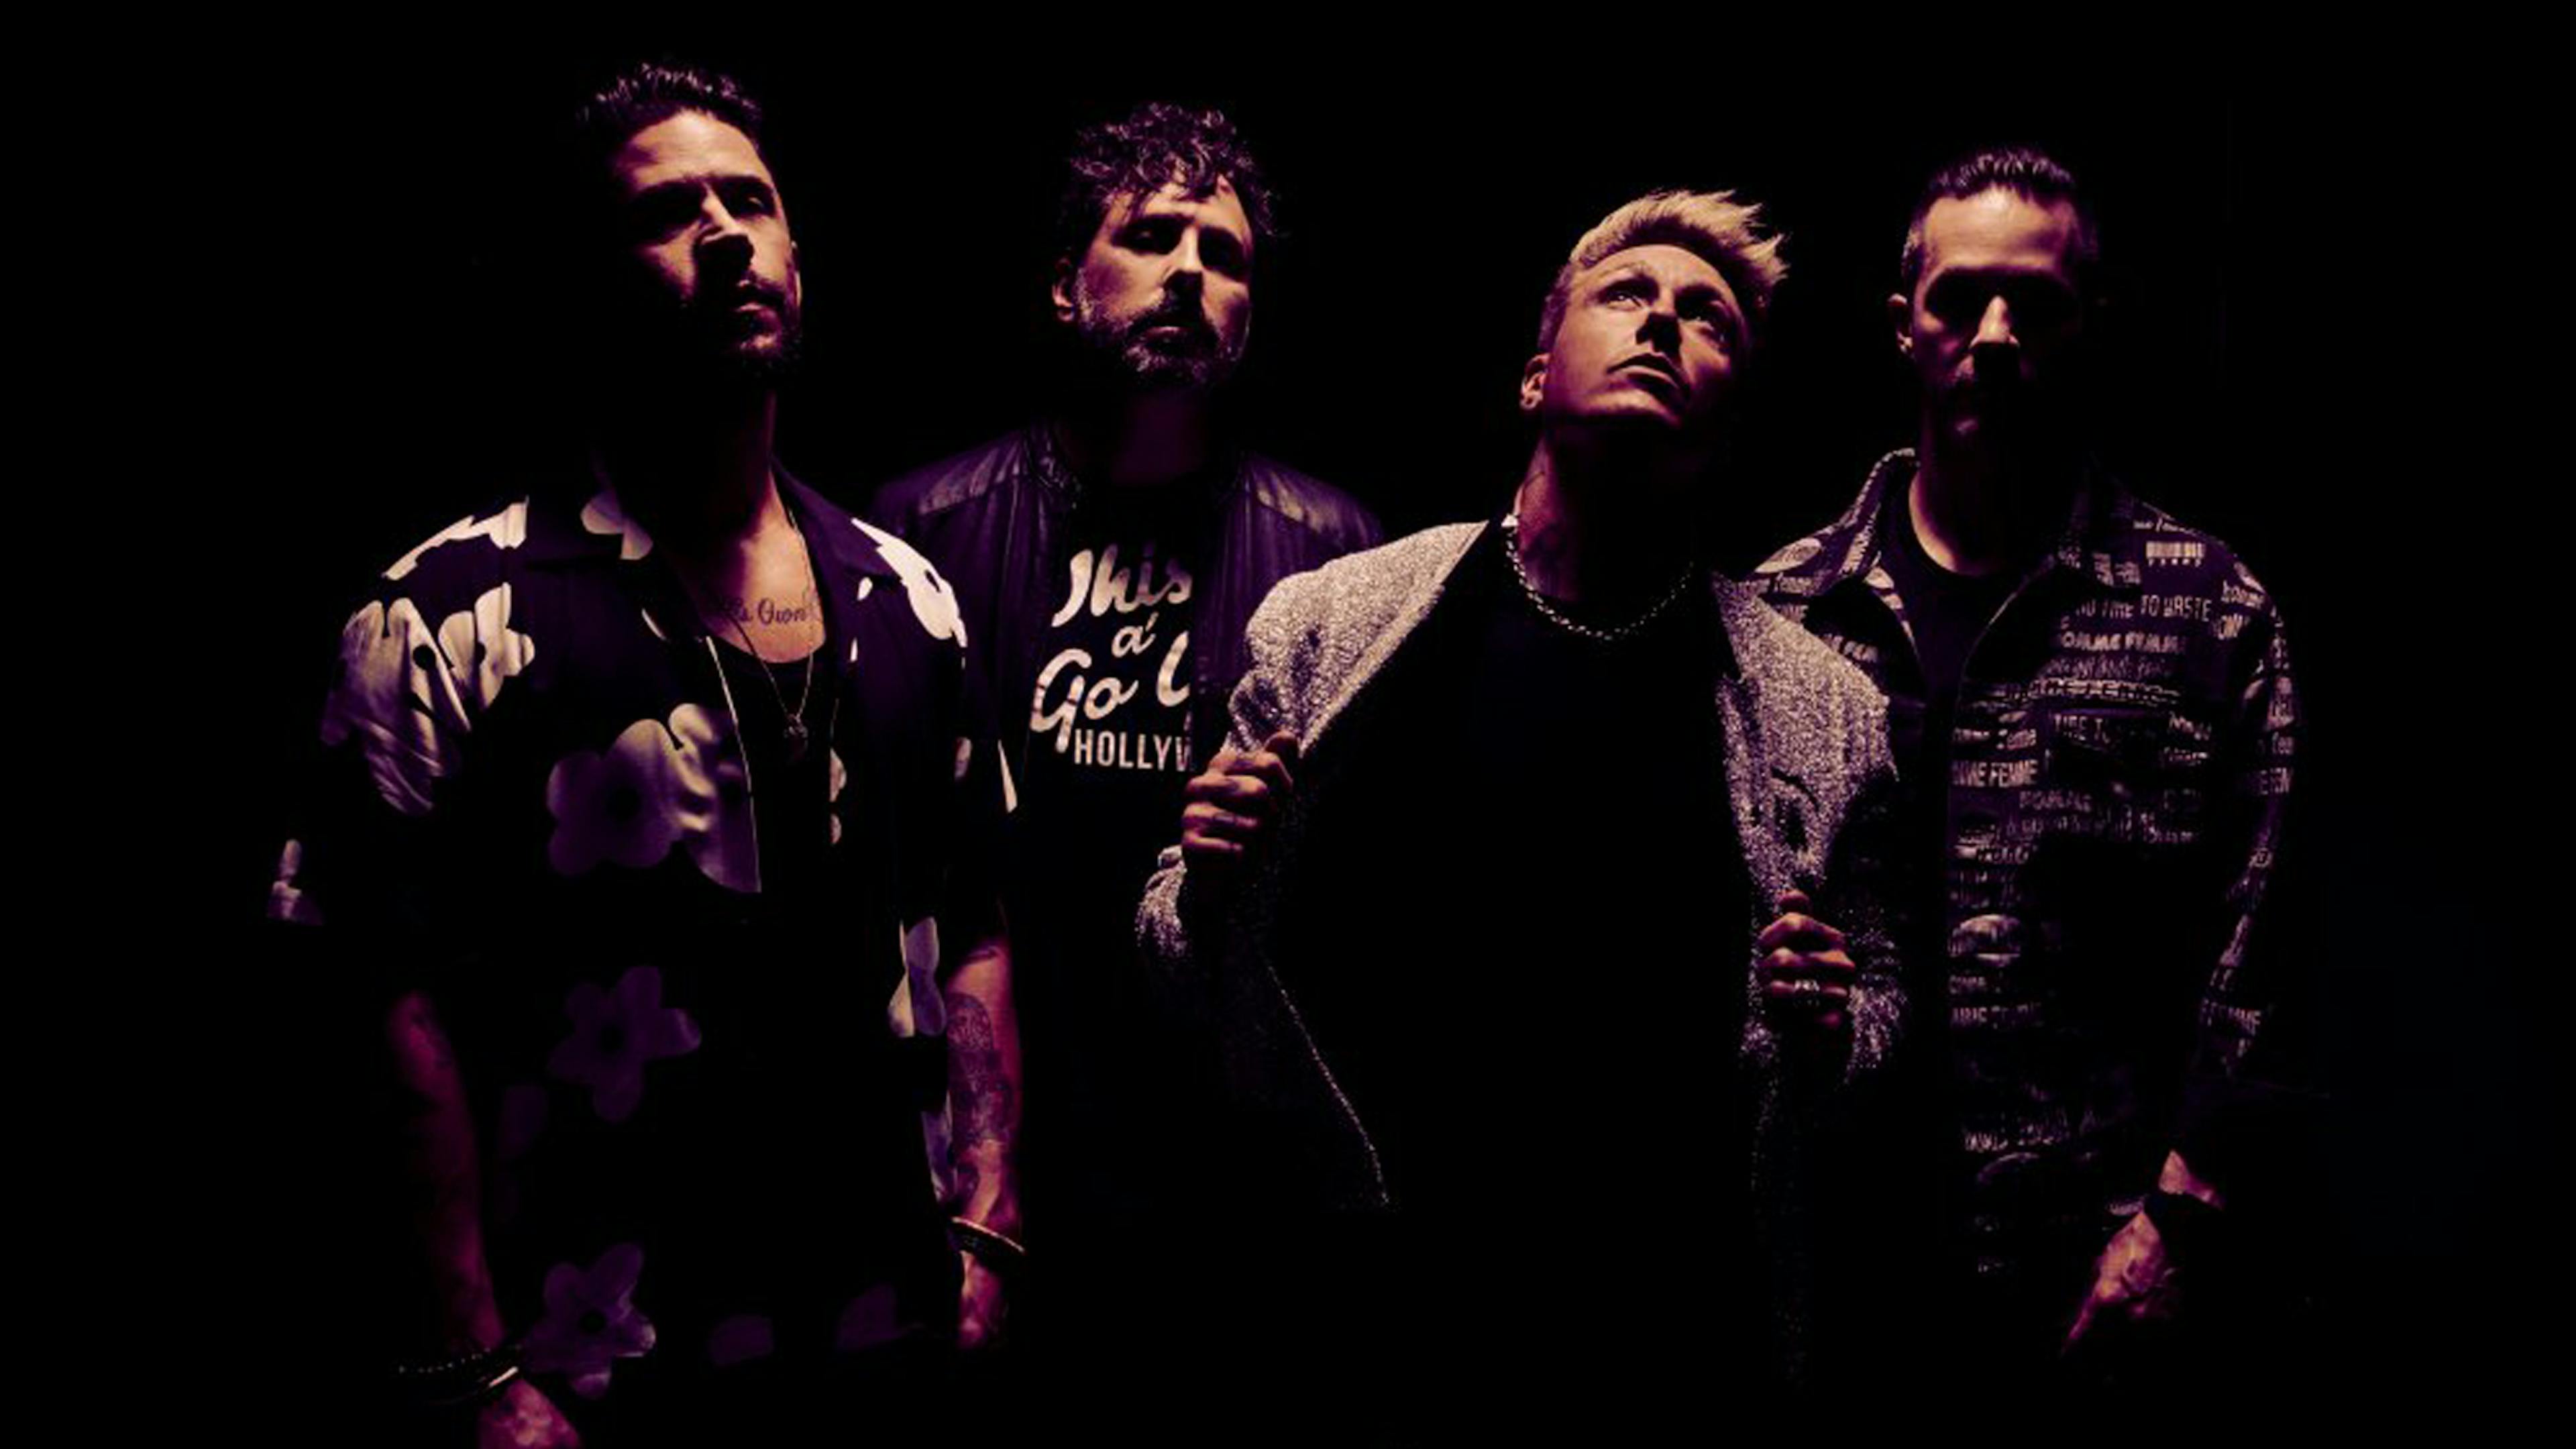 Papa Roach announce 11th album Ego Trip, release new song Cut The Line